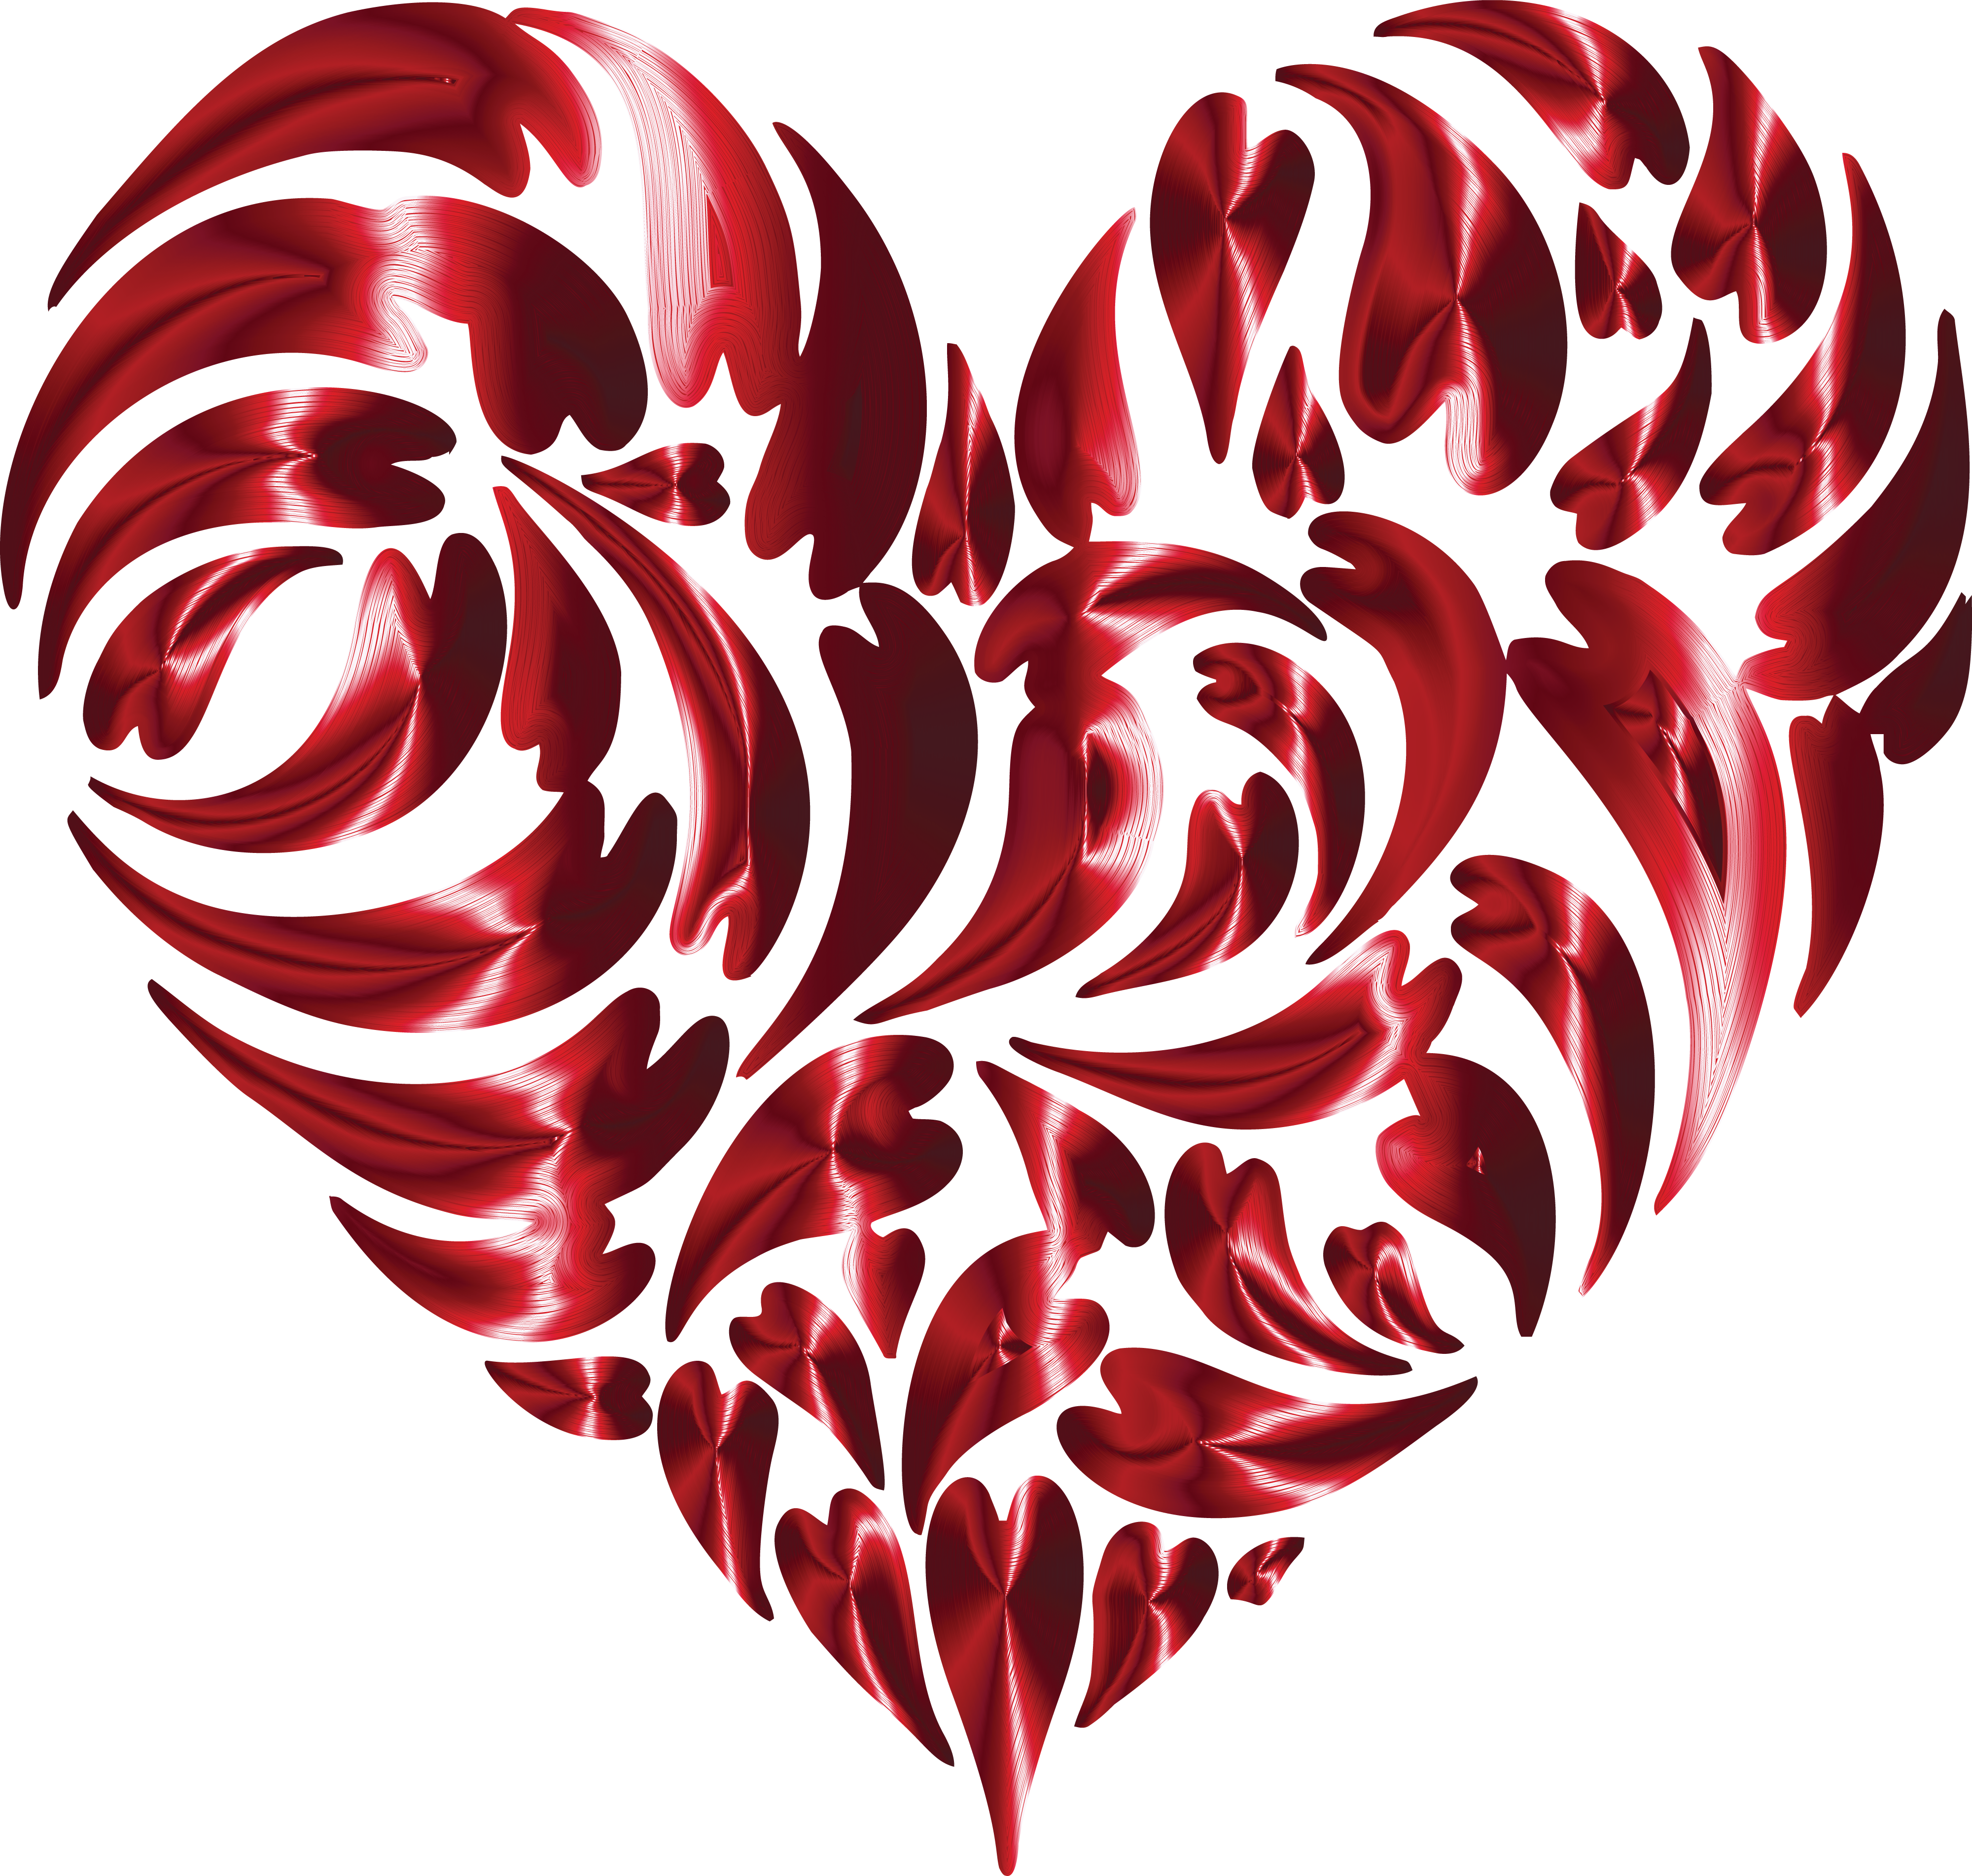 Download Free Clipart Of A Heart Made of Shiny Red Hearts